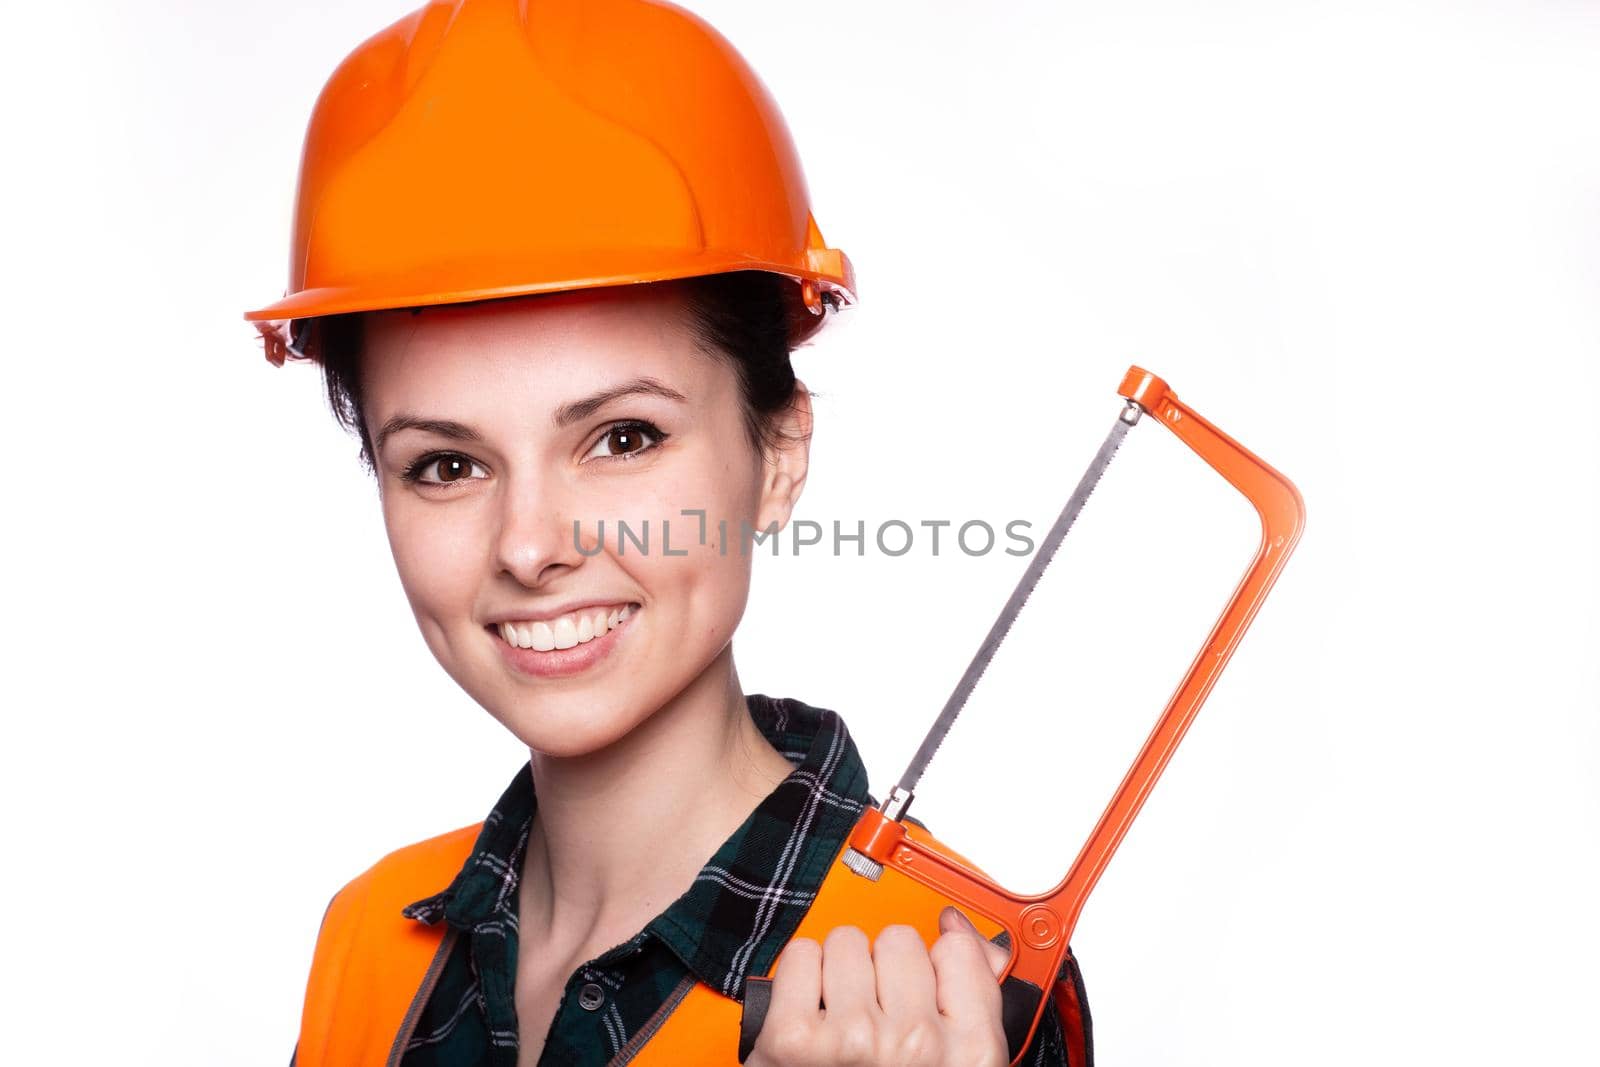 a woman in a construction helmet, and an orange vest holds a construction tool in her hand, white studio background, close-up portrait. High quality photo